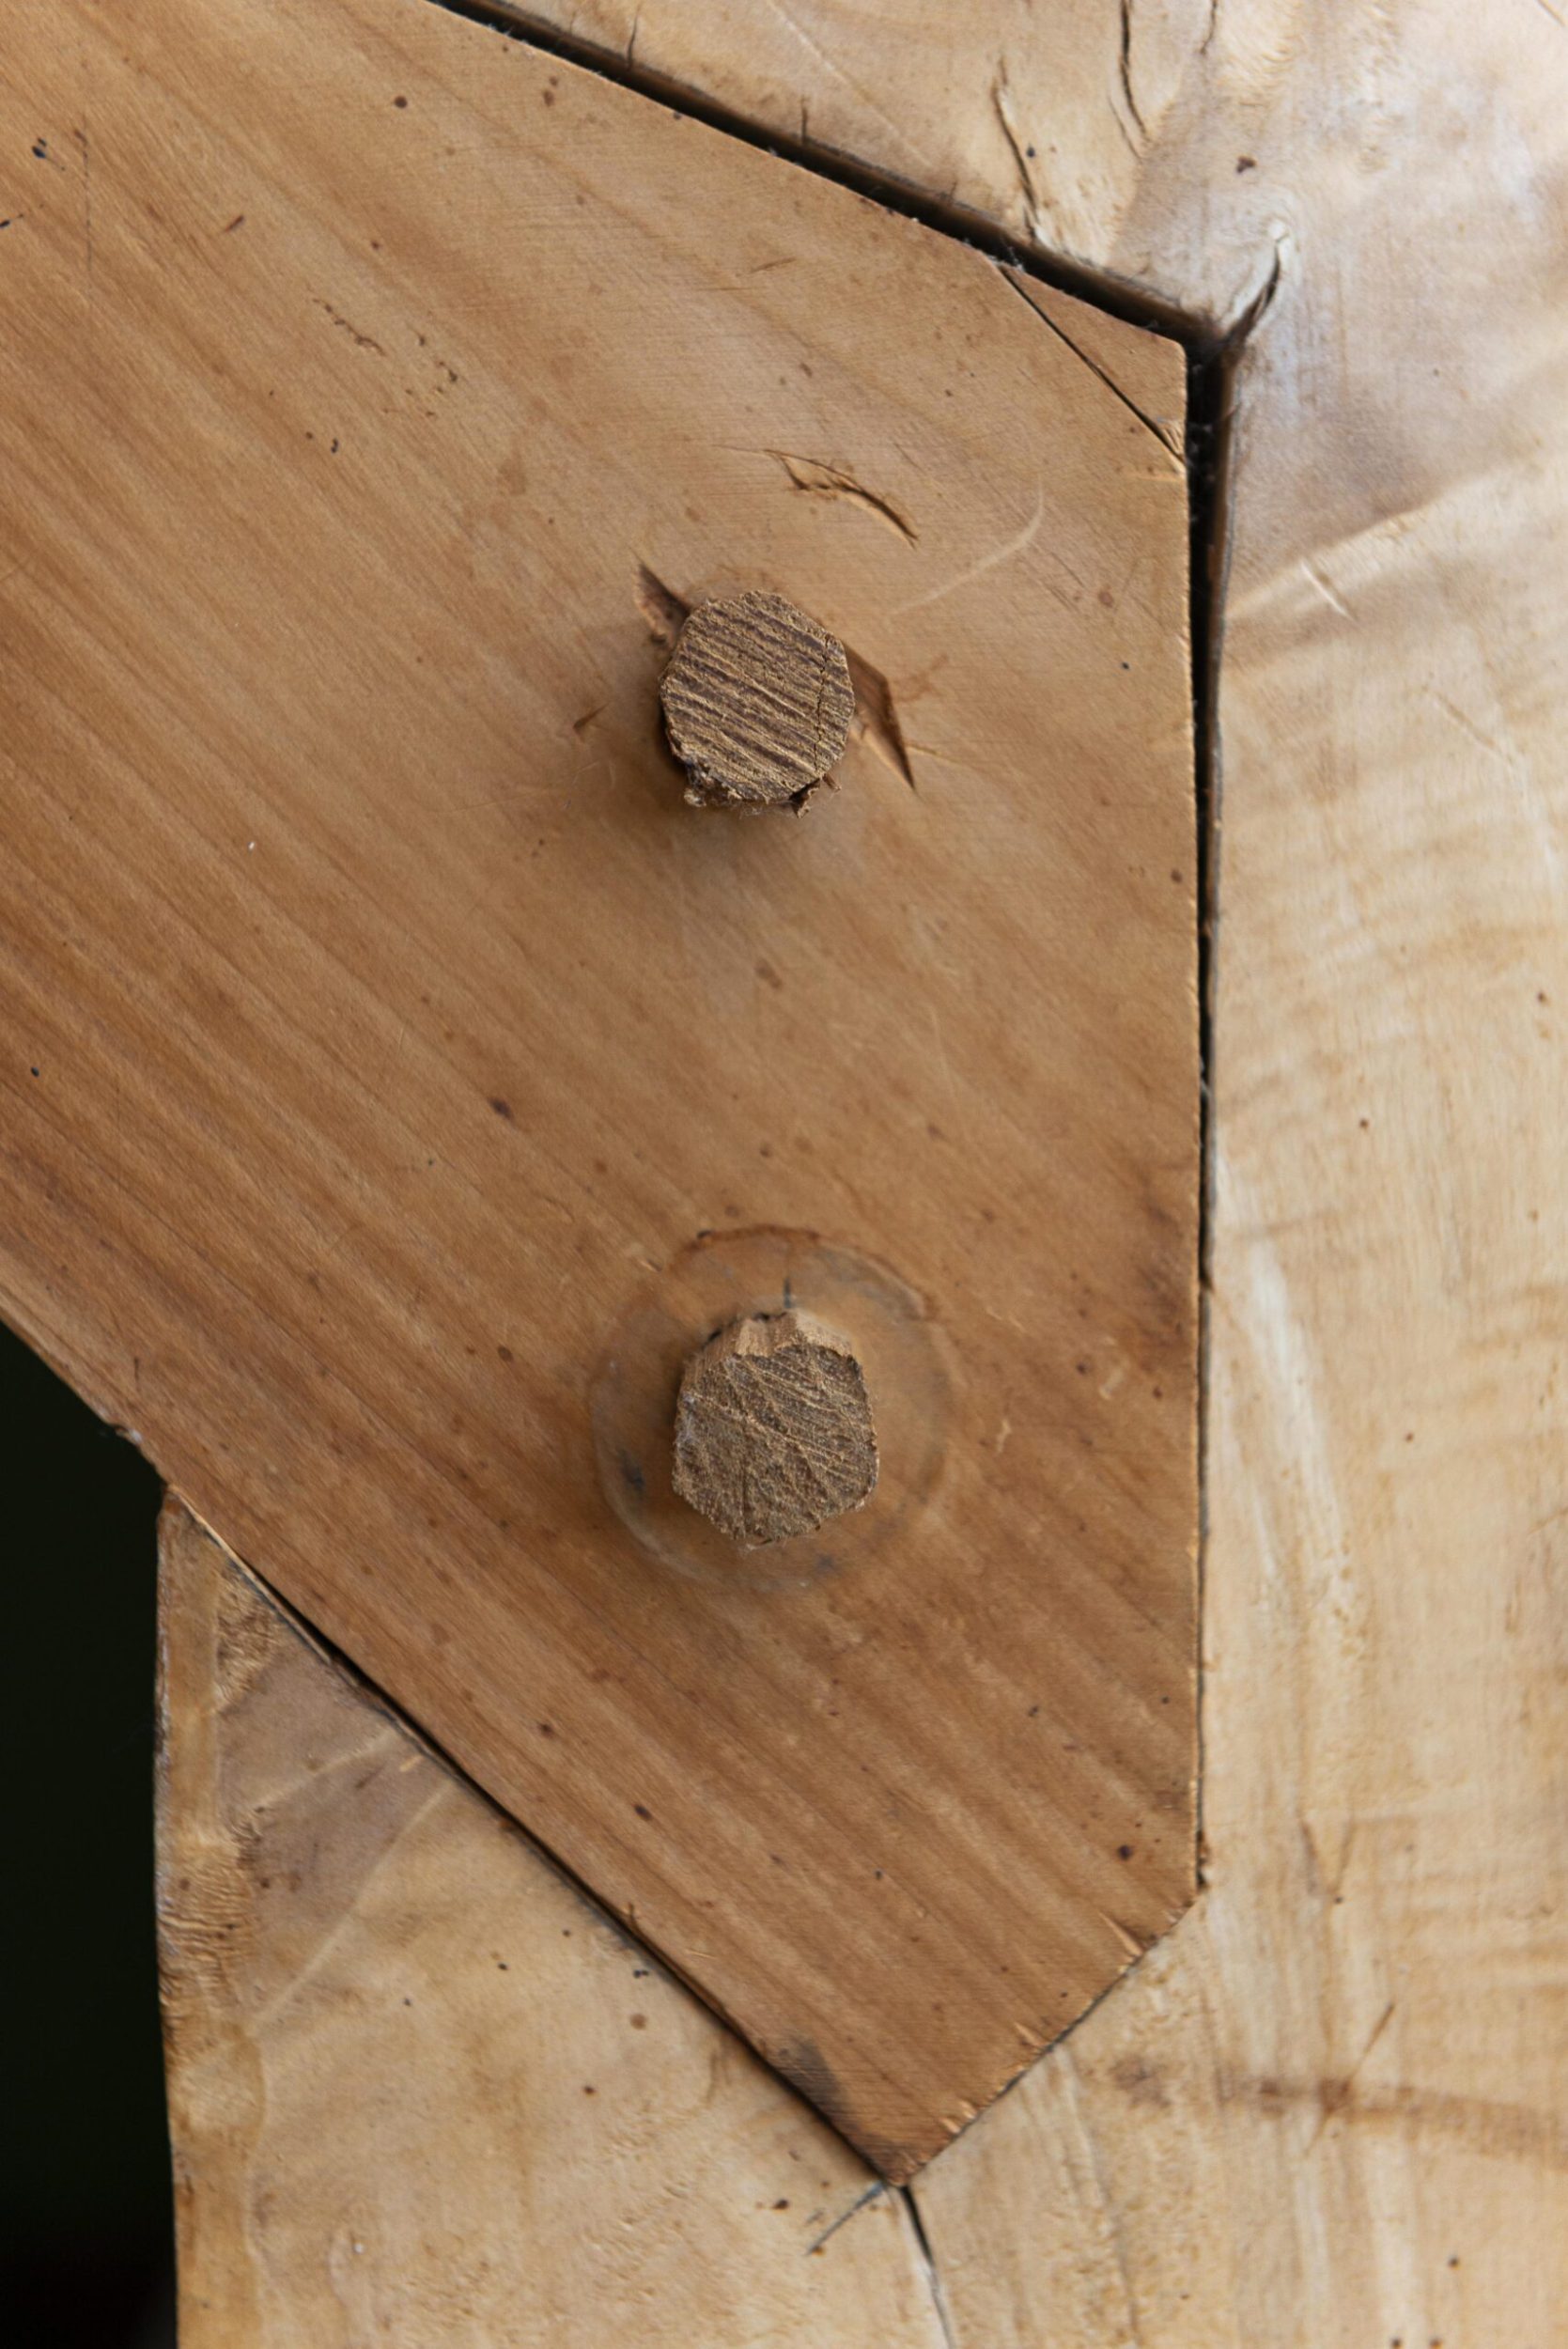 A close up of a timber joinery using treenails